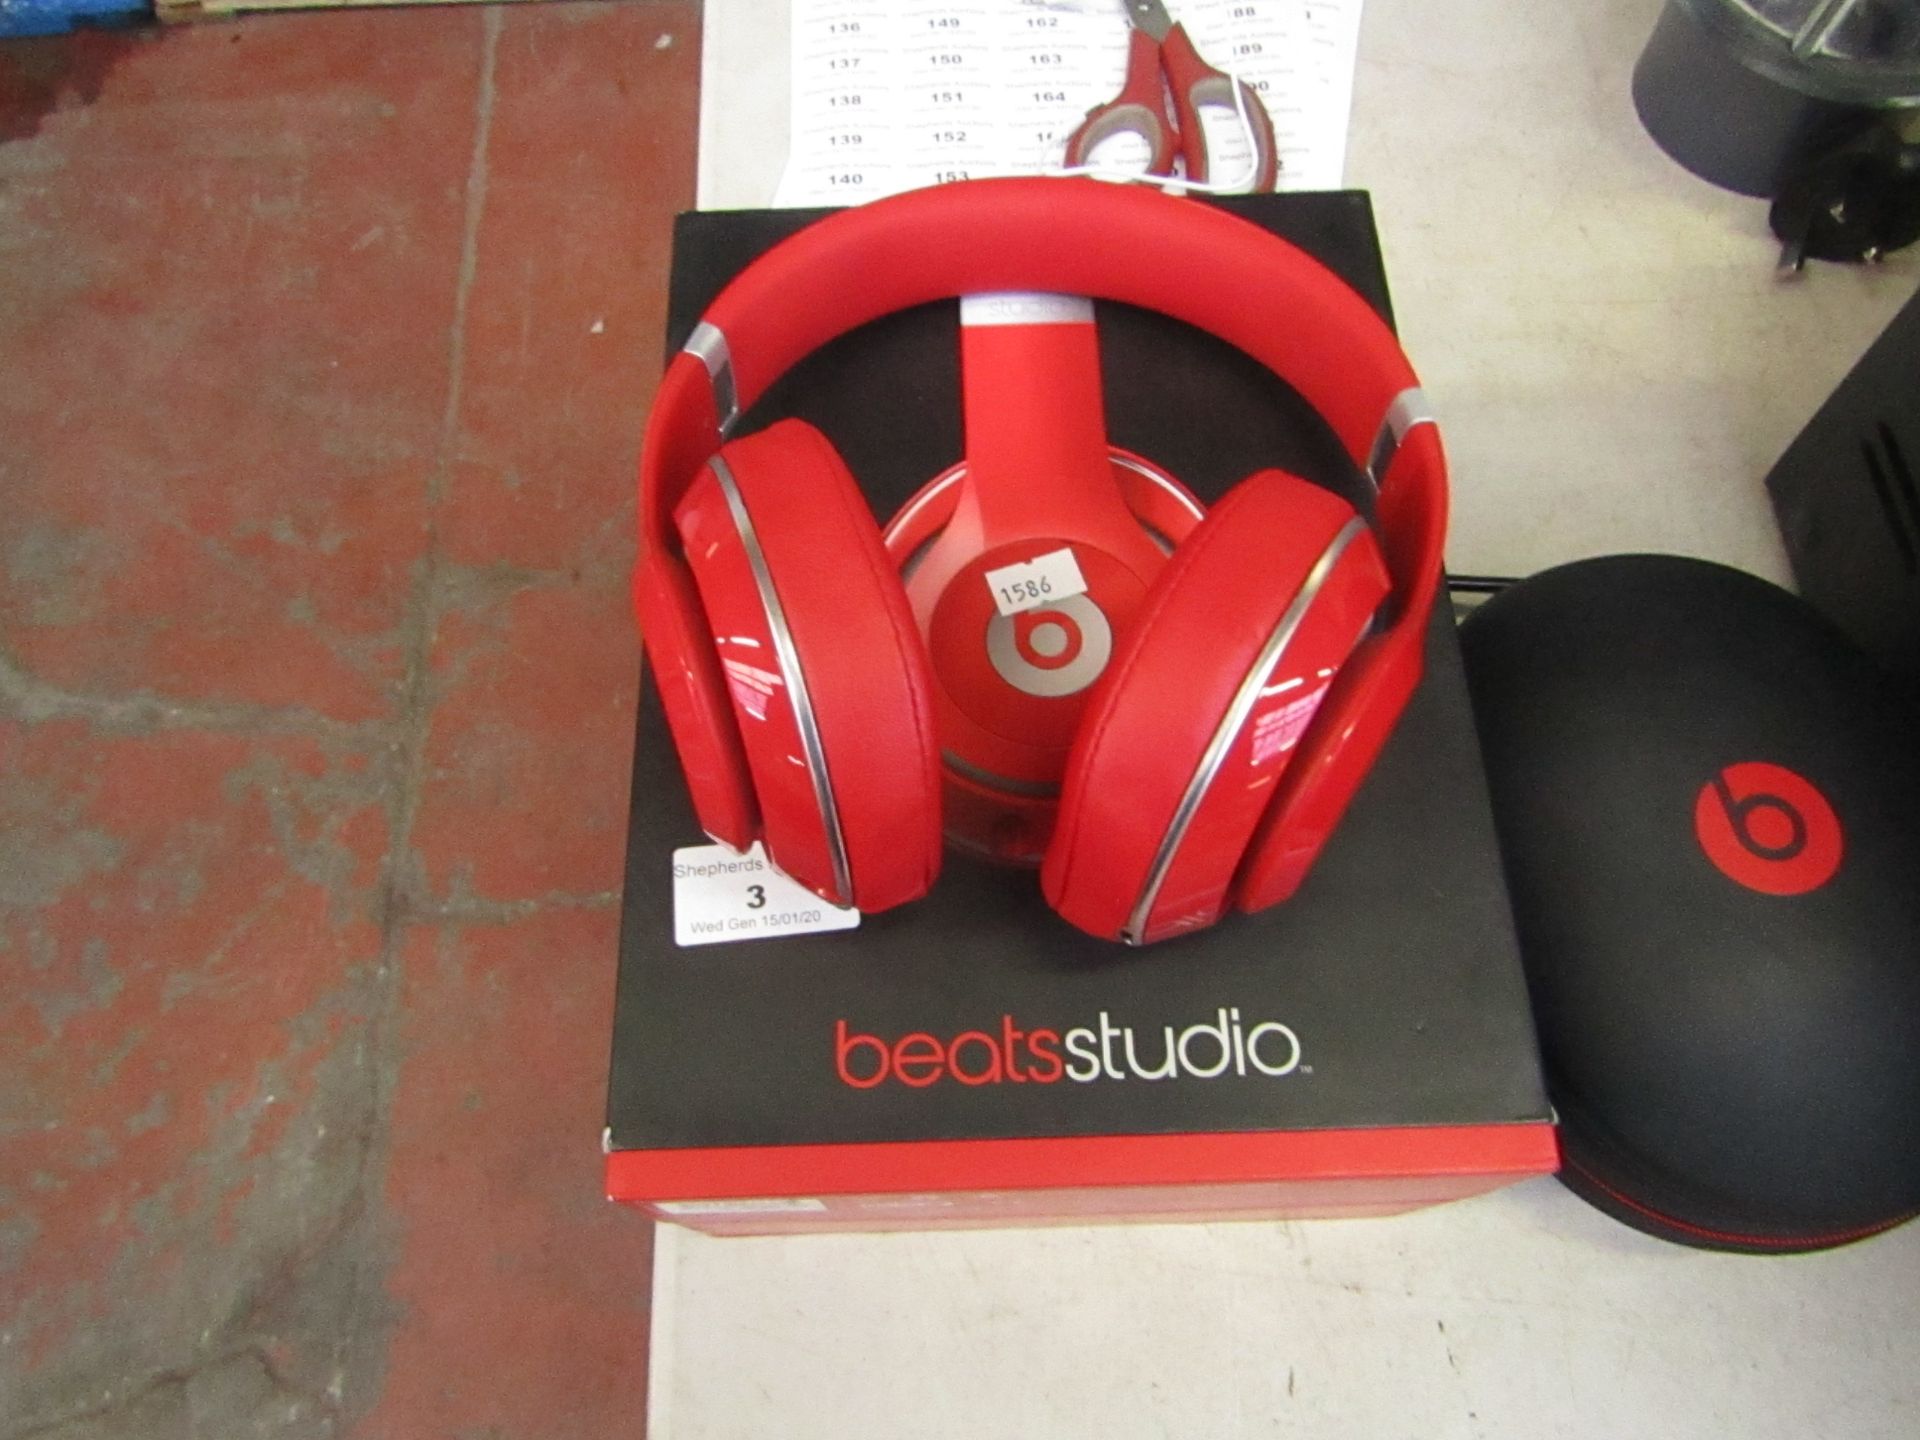 Beats Studio headphones 2.0 wired, untested due to no aux cable but the headphones do power on.